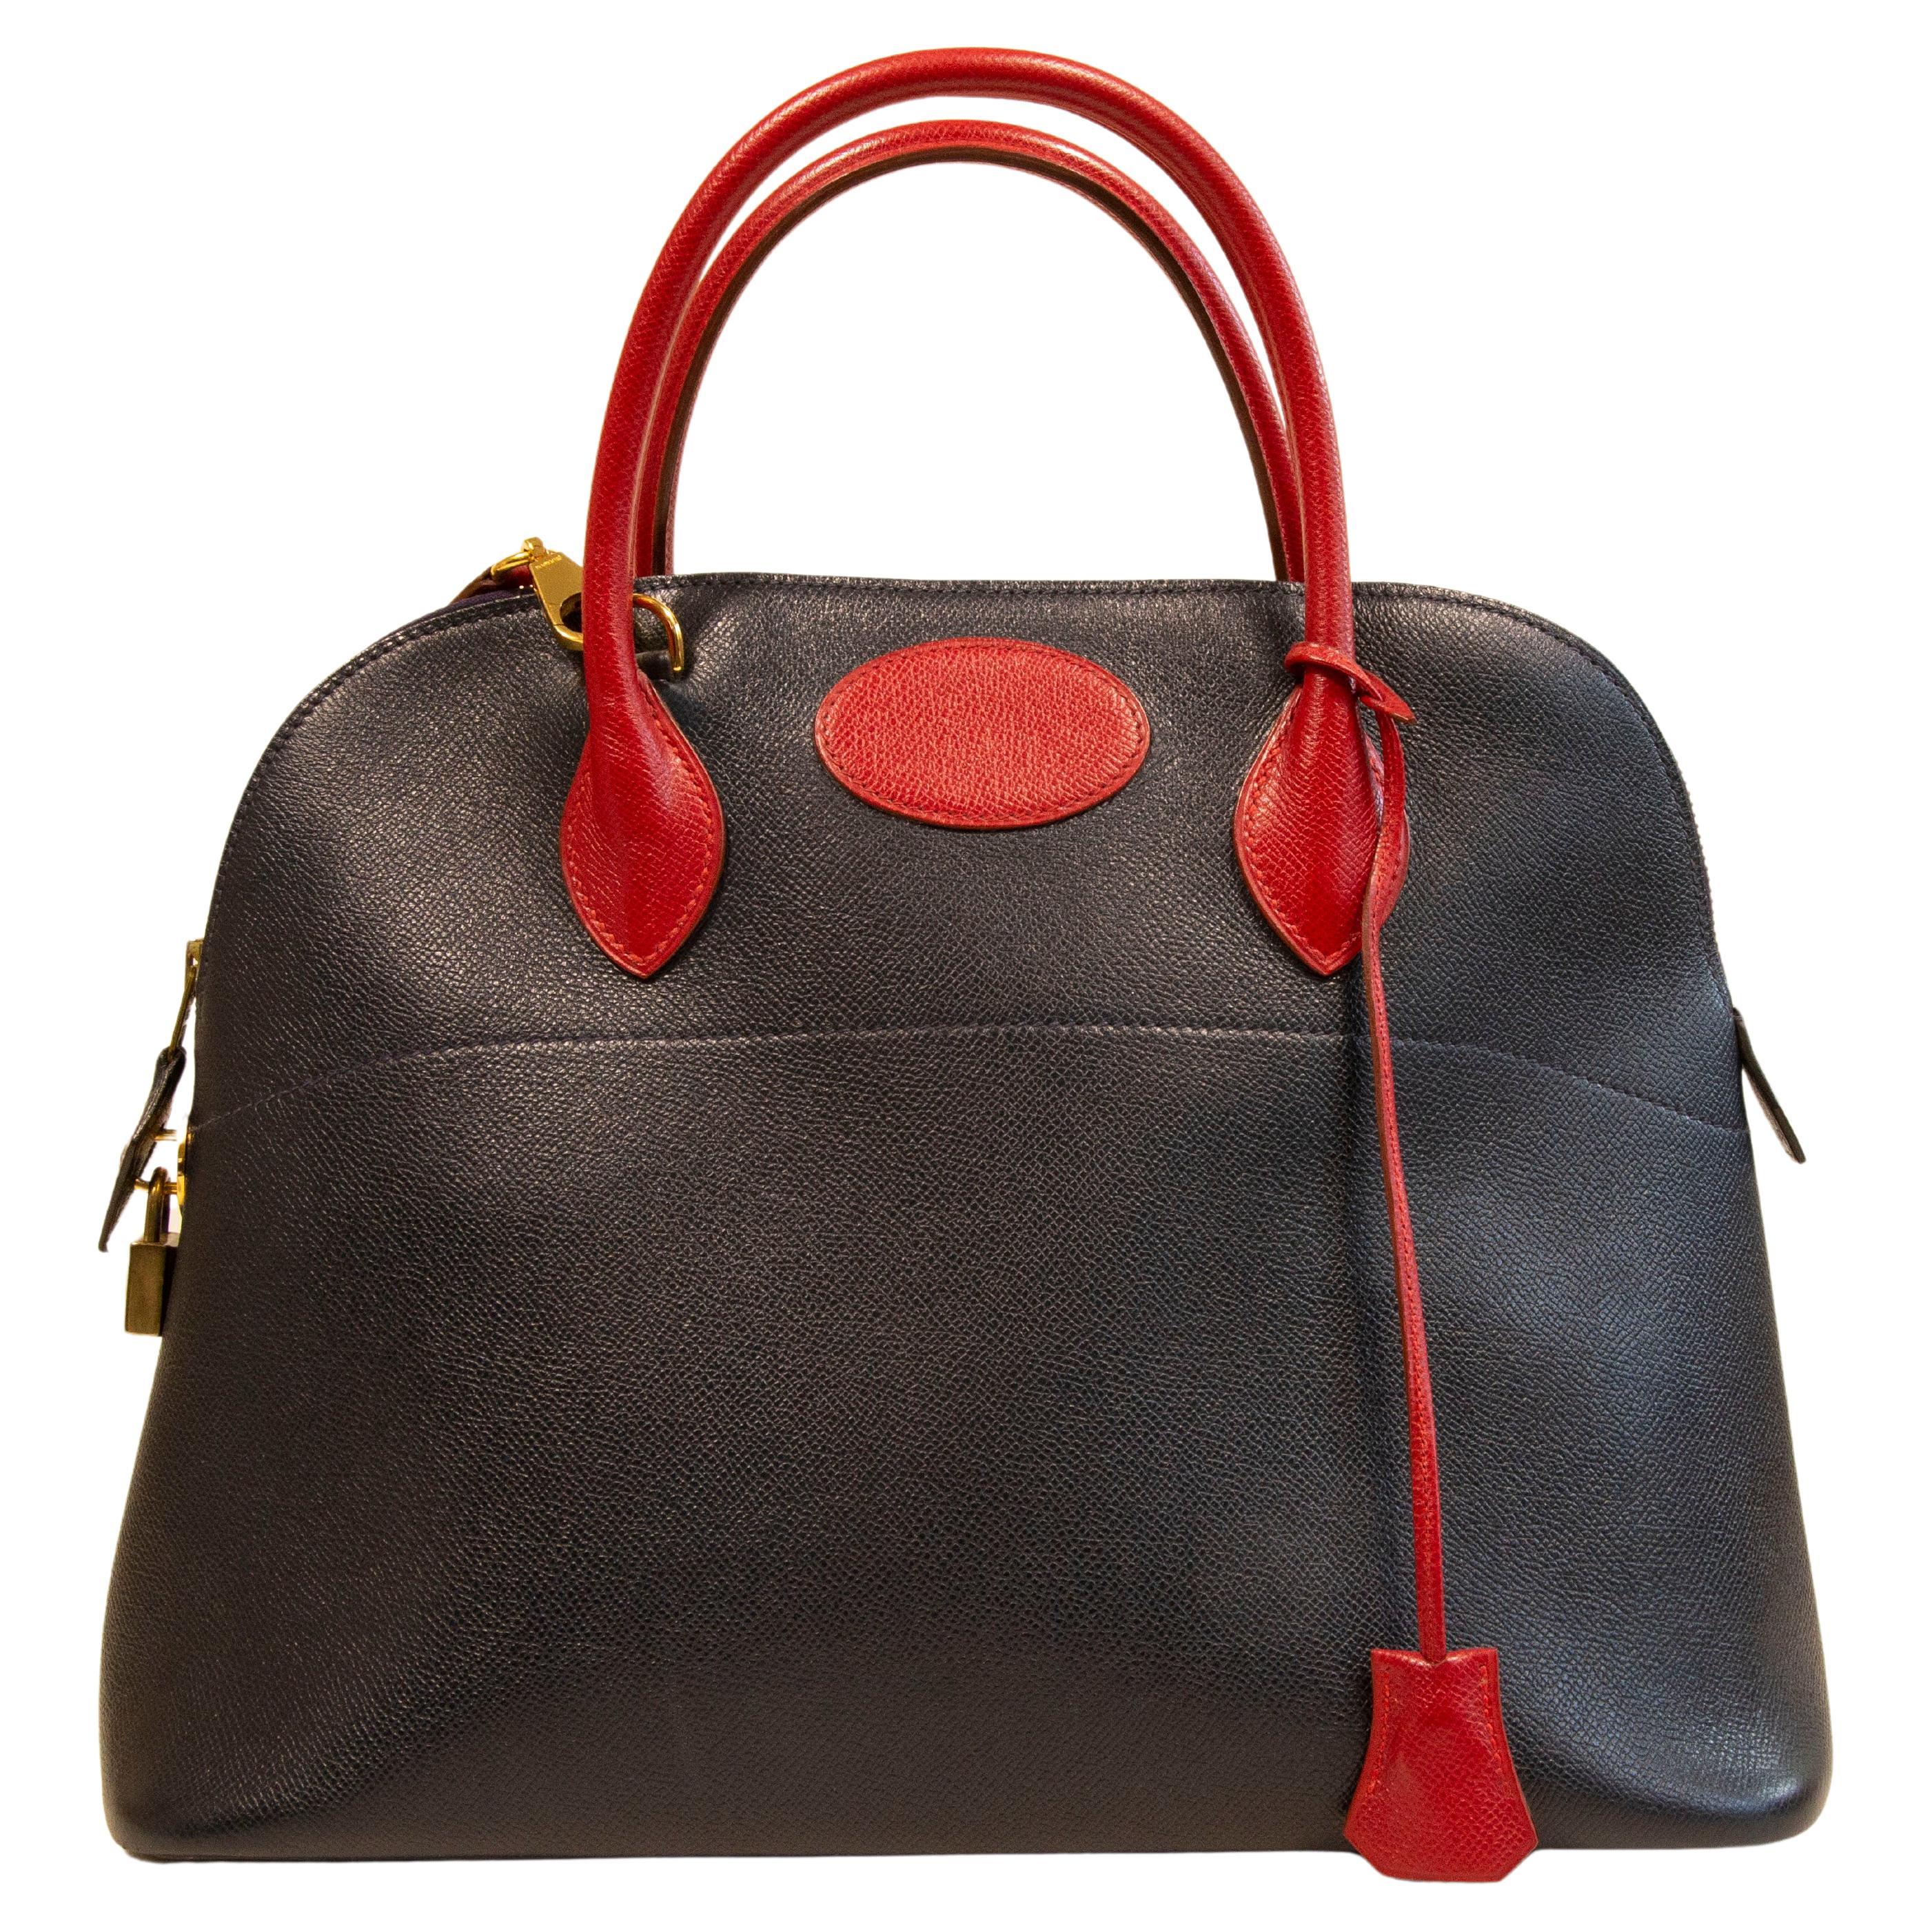 1990s Hermes Bolide 35 Bag in Navy Blue and Red Leather For Sale